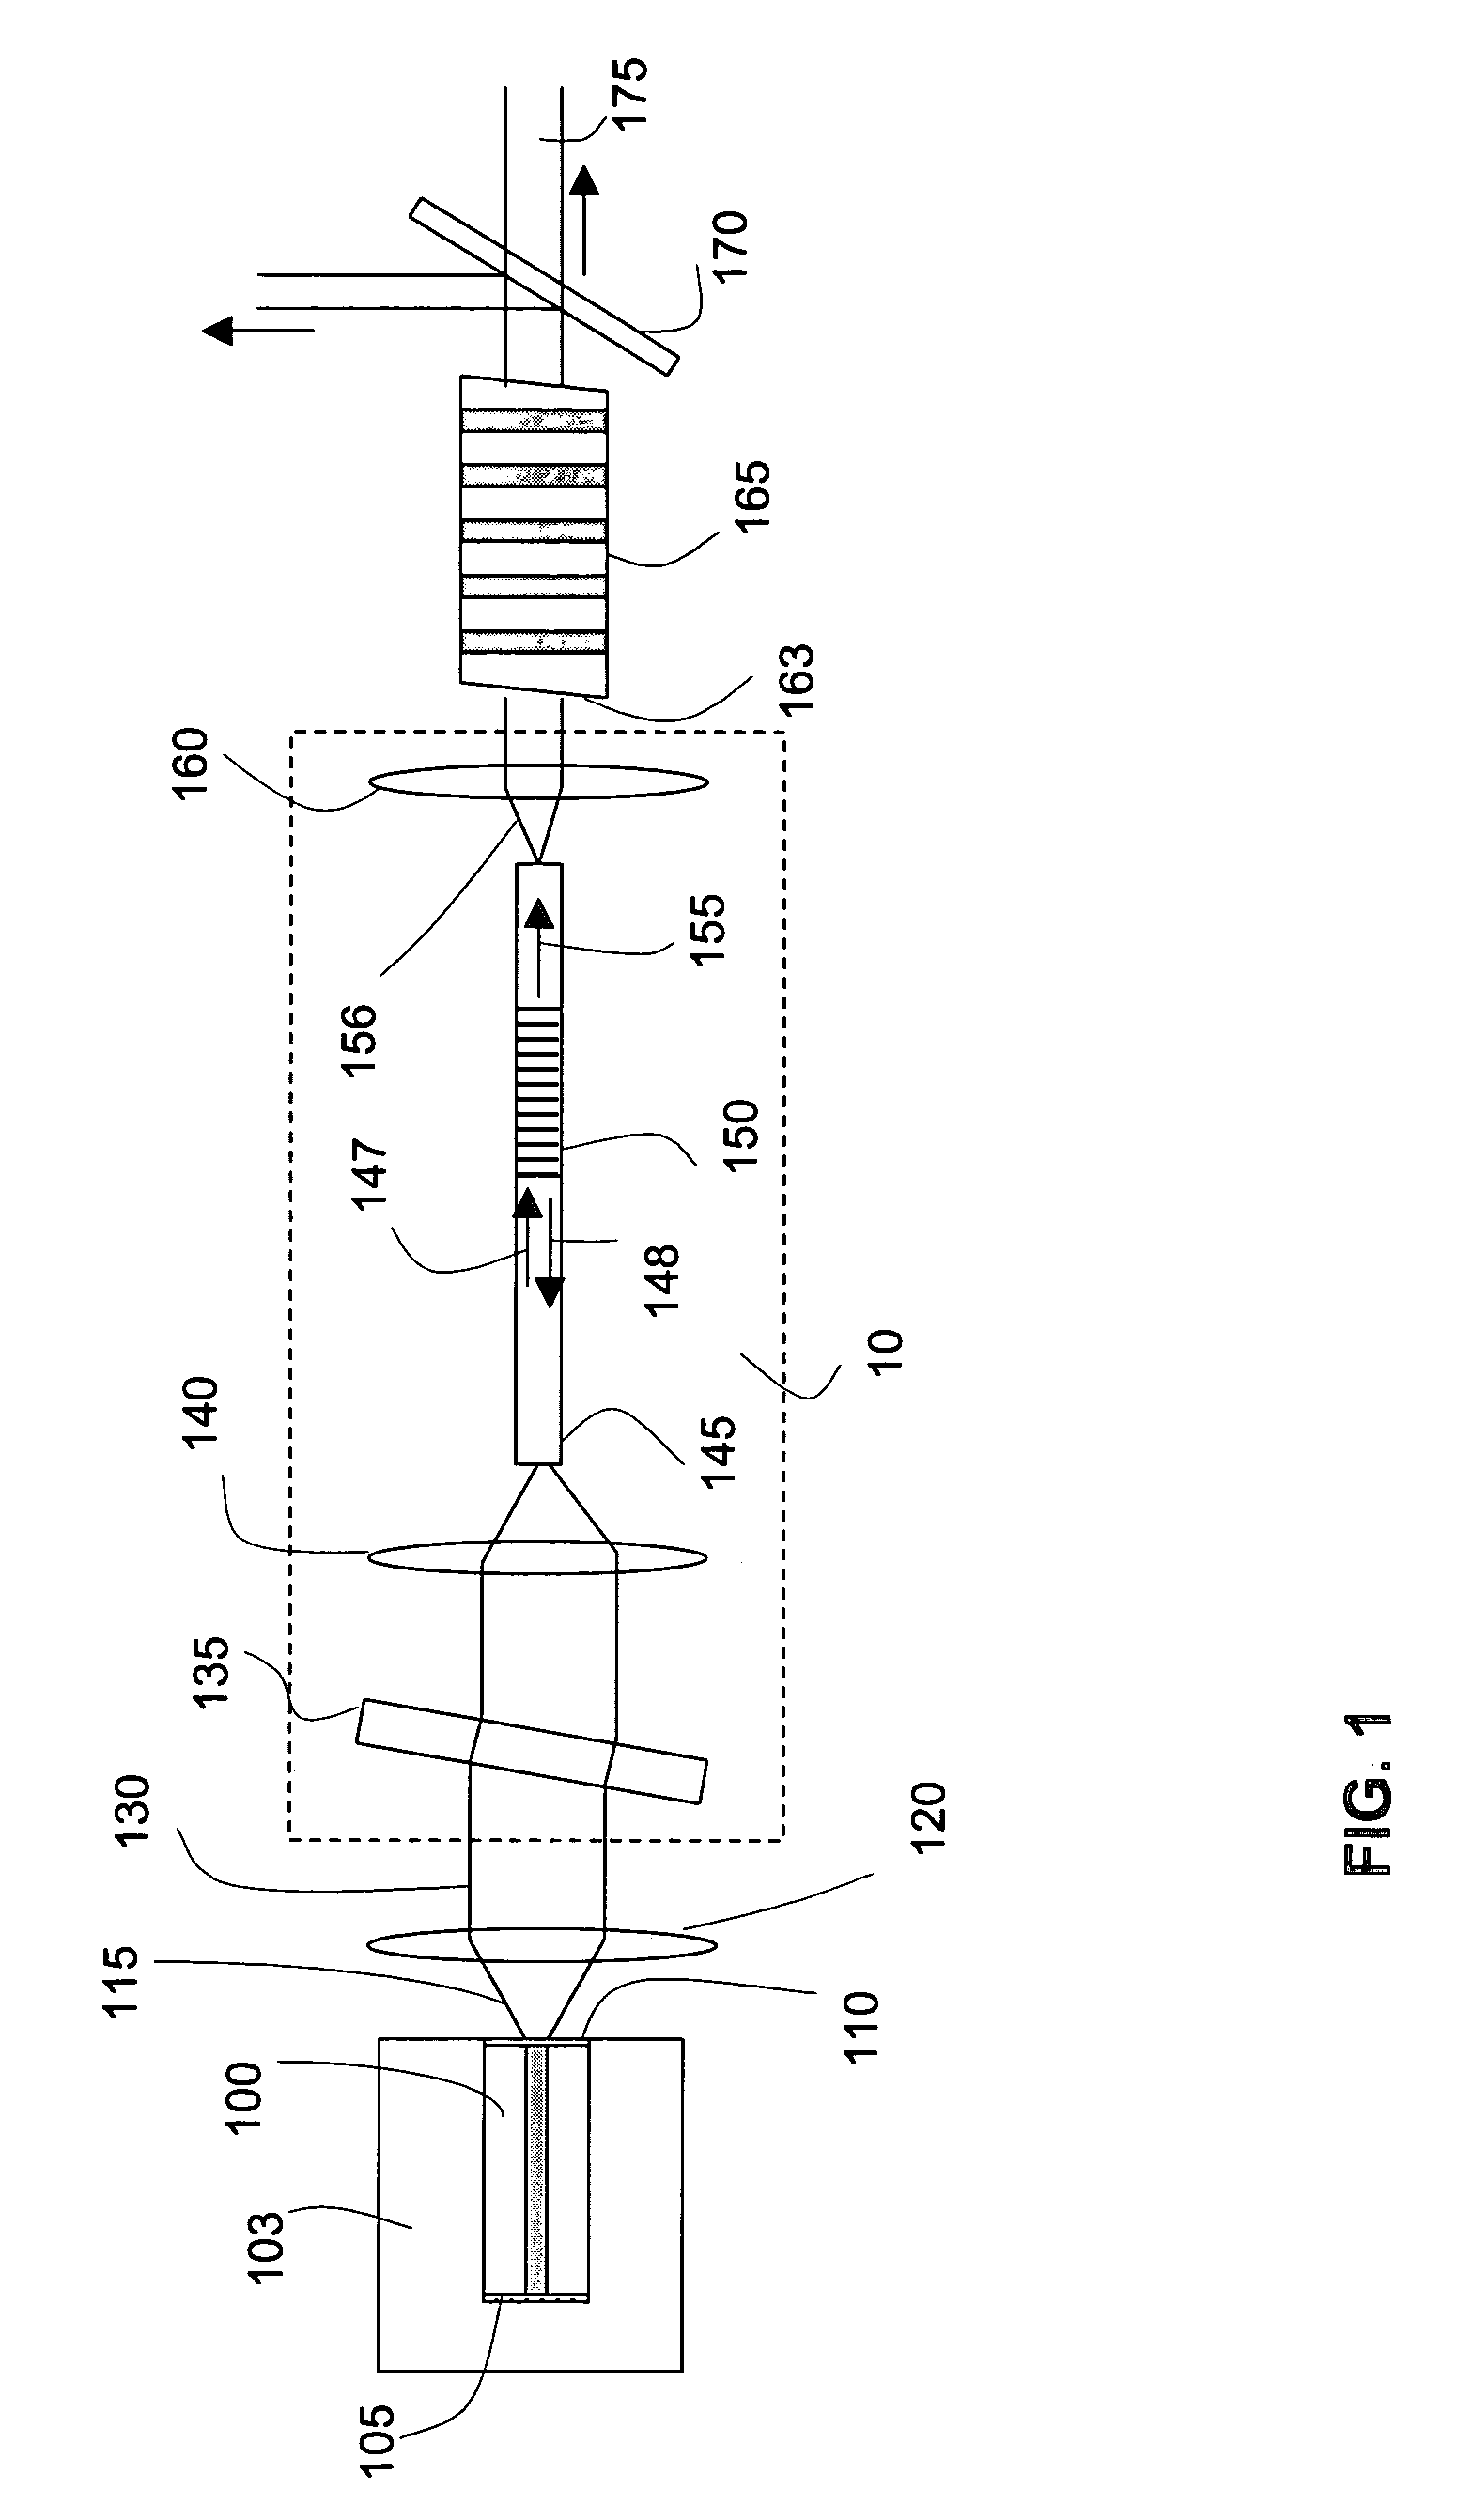 Laser device for nonlinear conversion of light